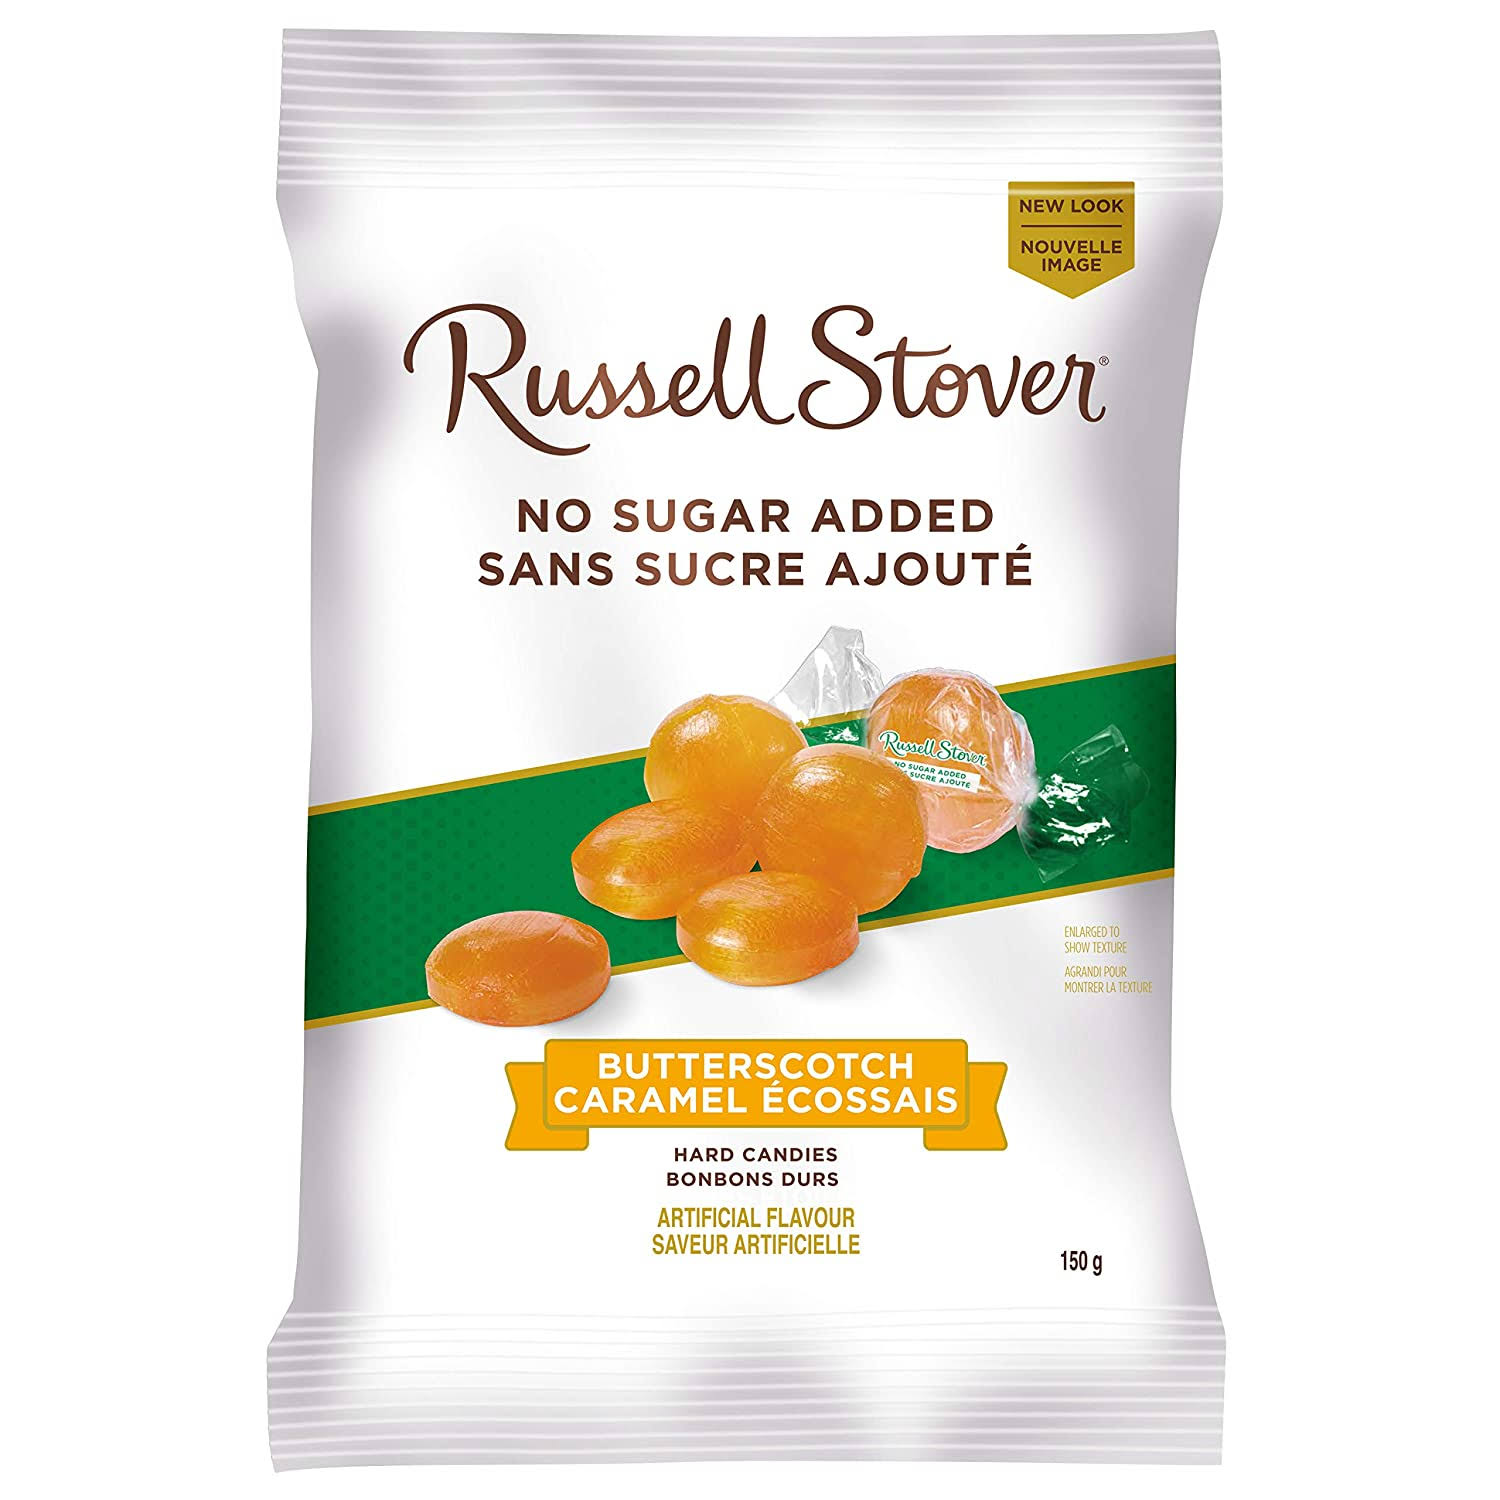 Russell Stover No Sugar Added Butterscotch Hard Candies Bag - 150g